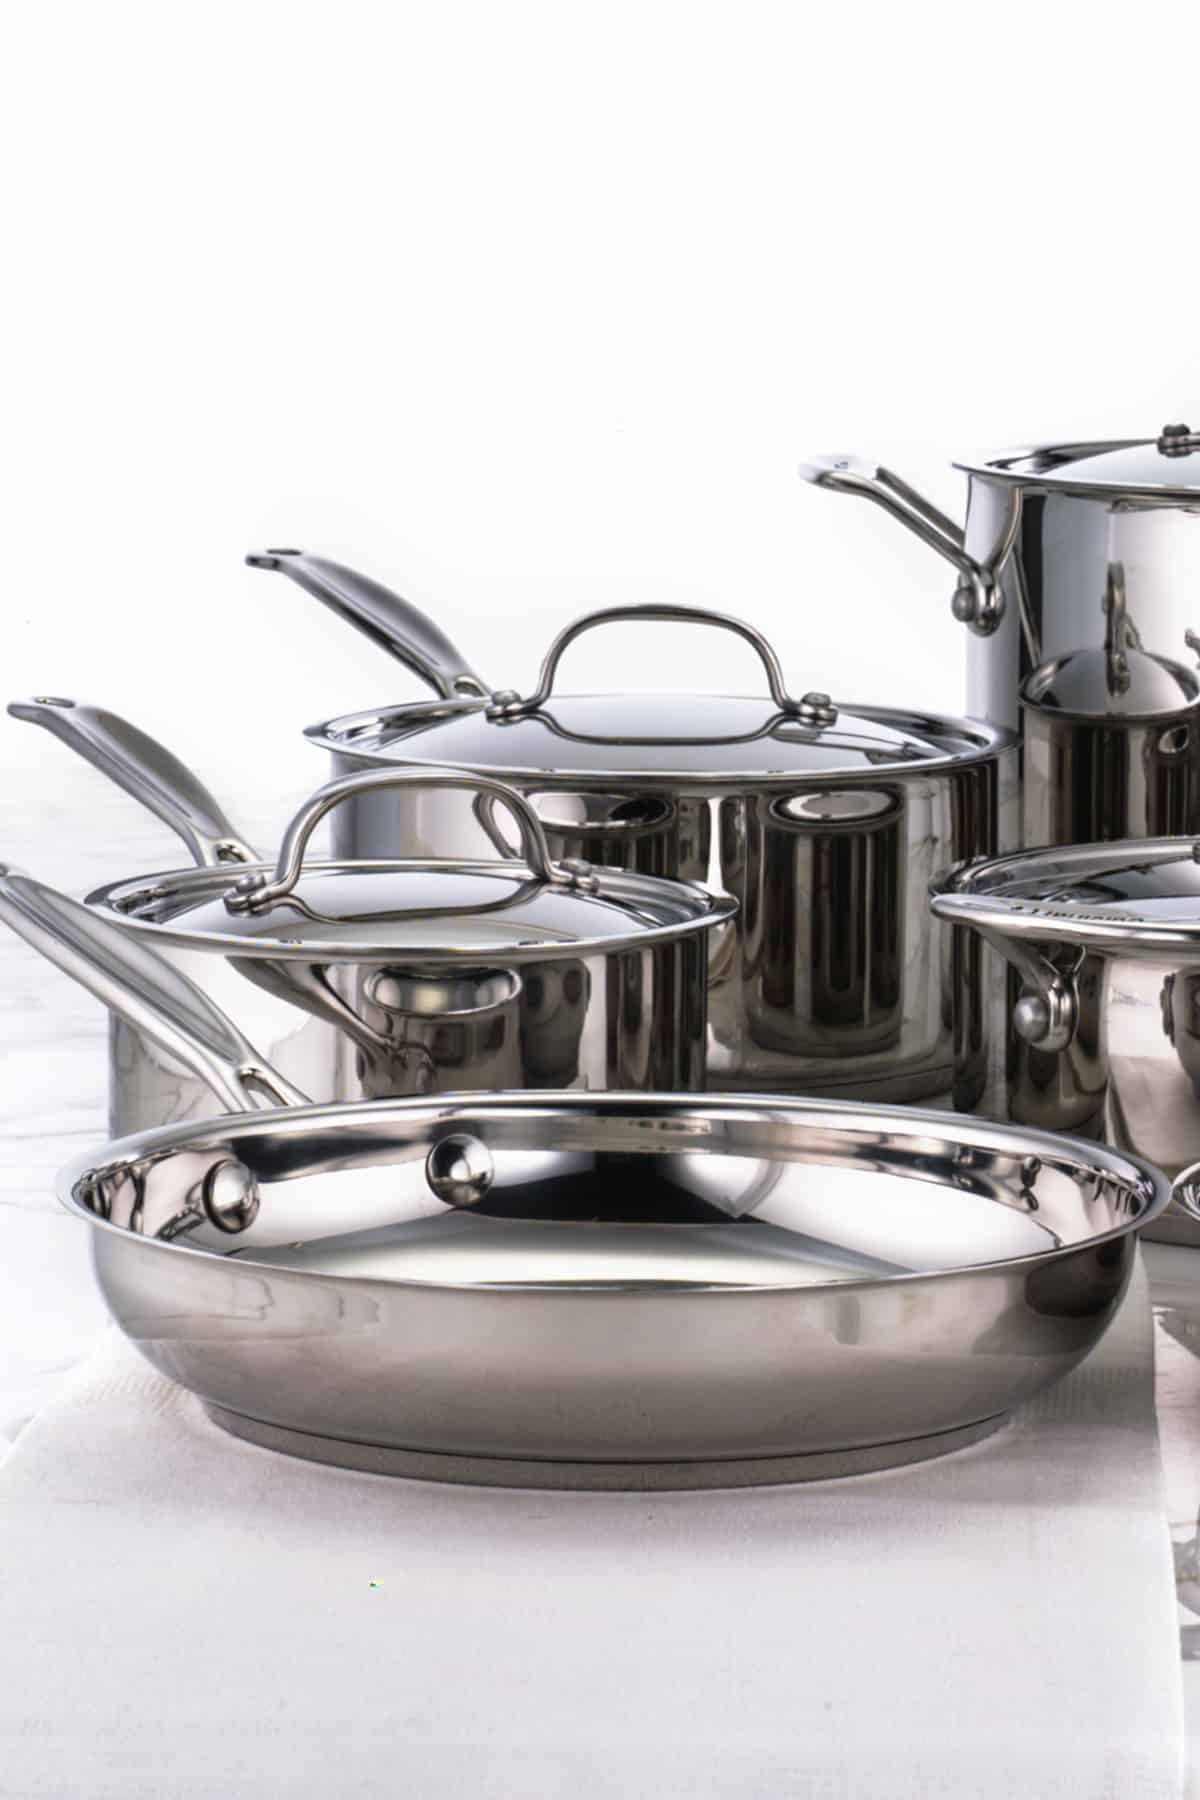 Stainless steel frying pan in front of other stainless steel pots. 